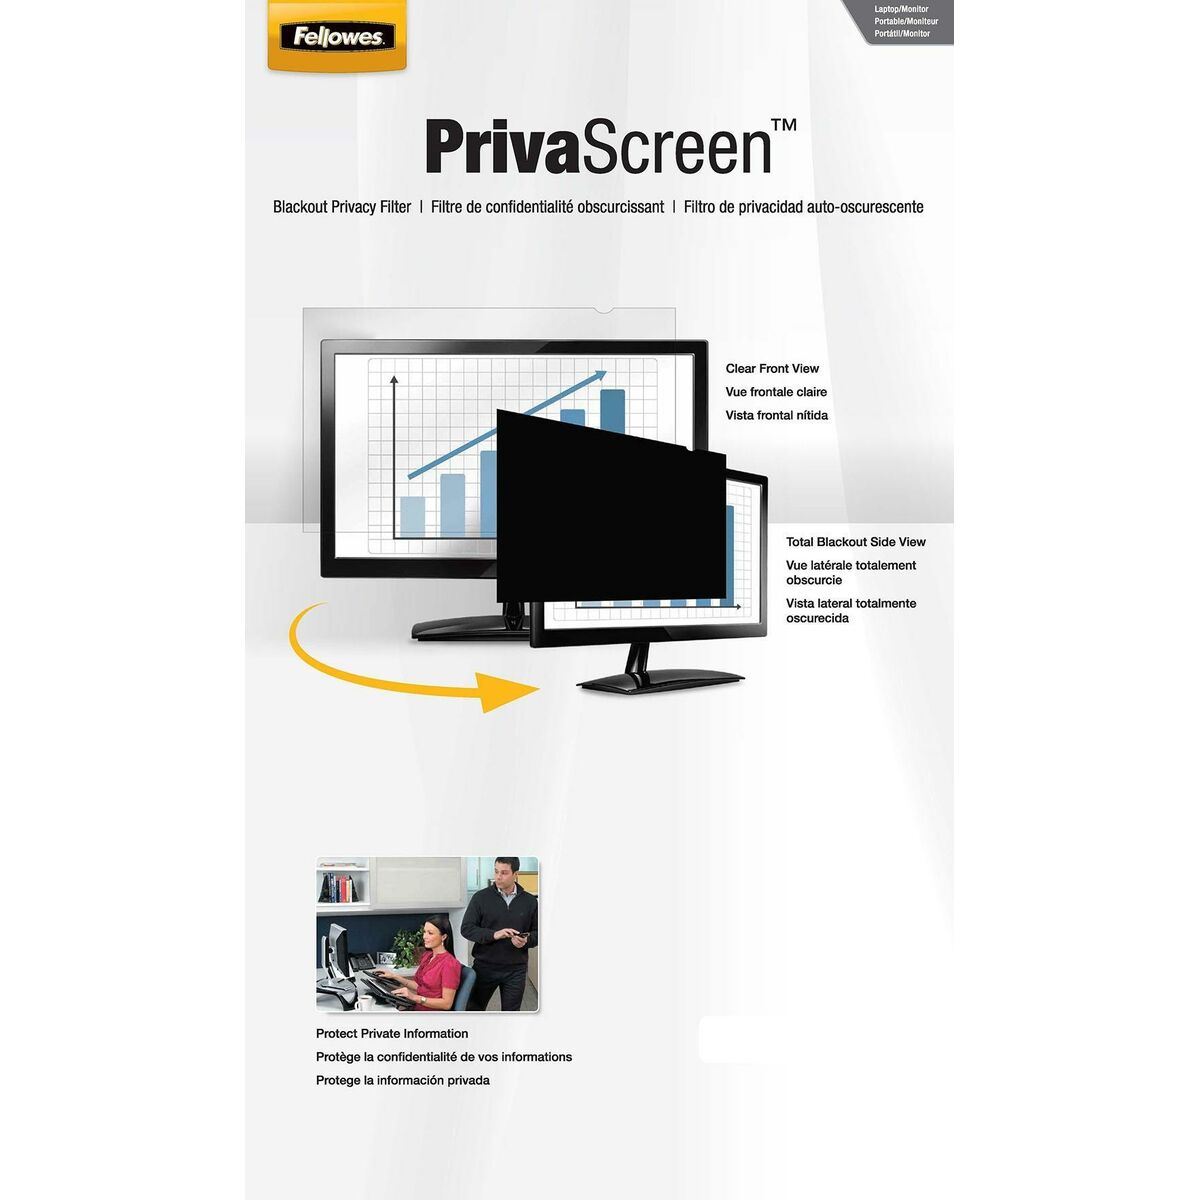 Privacy Filter for Monitor Fellowes PrivaScreen, Fellowes, Computing, Accessories, privacy-filter-for-monitor-fellowes-privascreen-1, Brand_Fellowes, category-reference-2609, category-reference-2642, category-reference-2644, category-reference-t-19685, category-reference-t-19908, category-reference-t-21342, computers / peripherals, Condition_NEW, office, Price_50 - 100, Teleworking, RiotNook